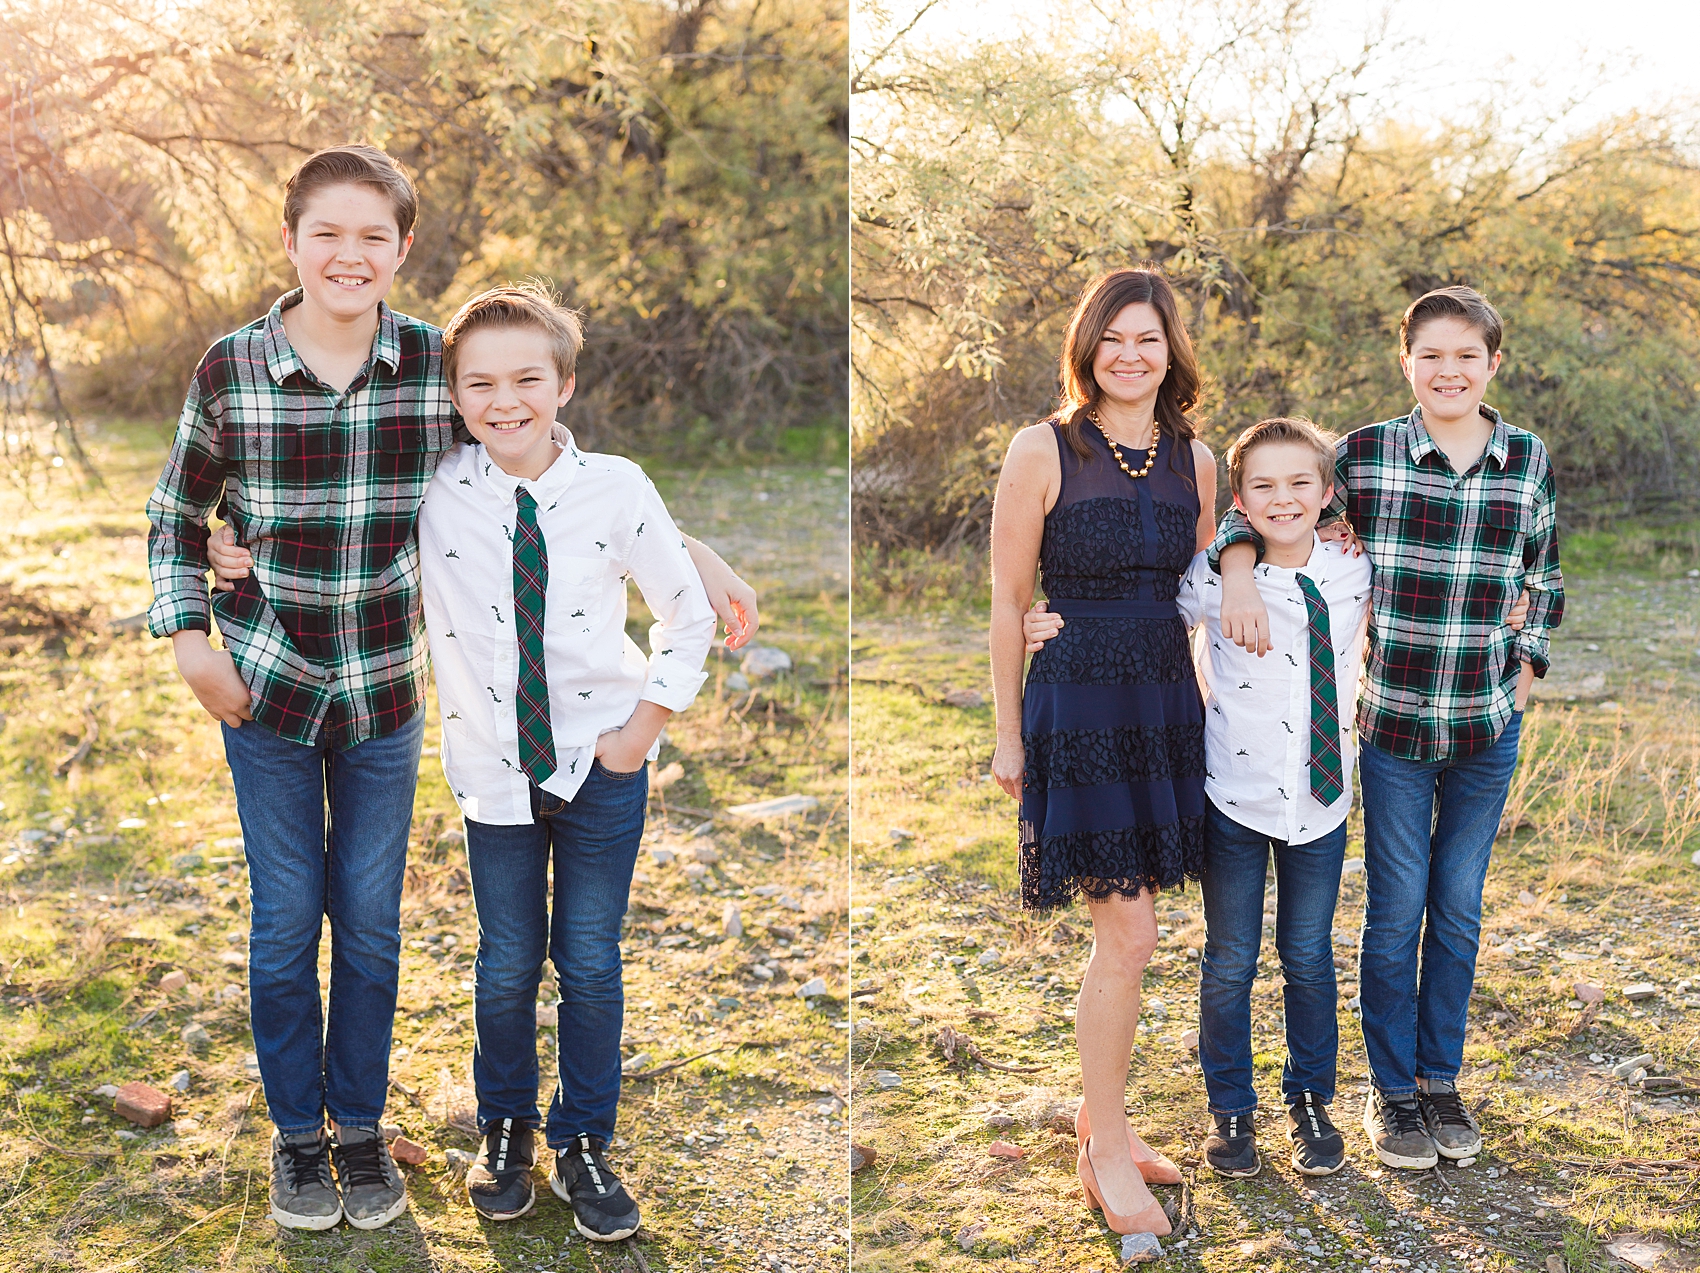 Leah Hope Photography | Scottsdale Phoenix Arizona | Dreamy Draw Desert Landscape | Family Pictures | What to Wear